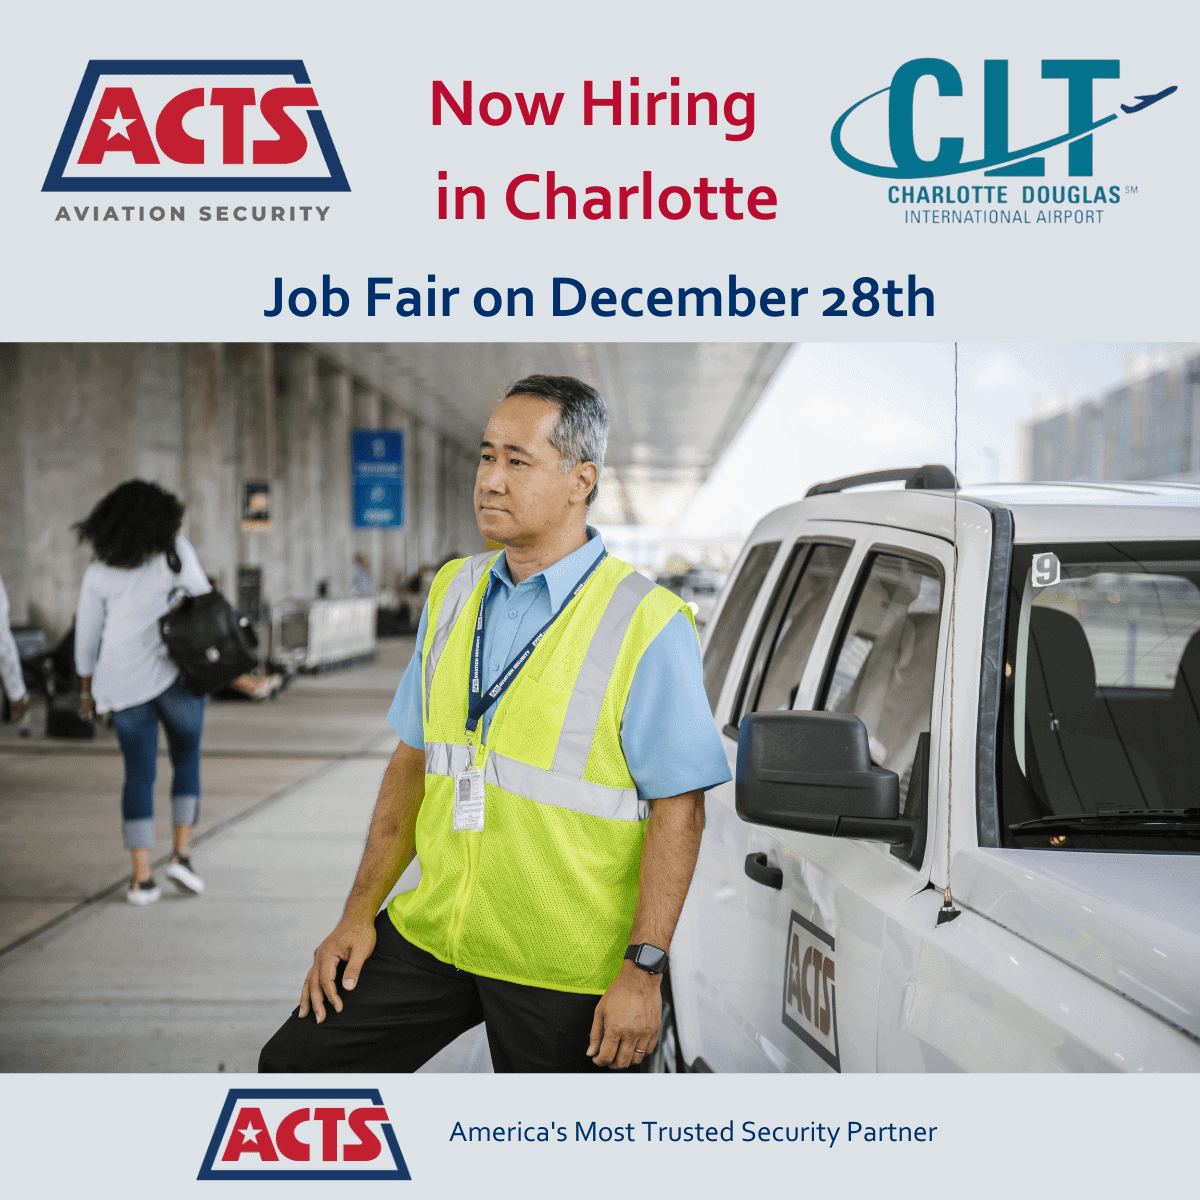 ACTS Invites Applicants to Charlotte Job Fair ACTS Aviation Security